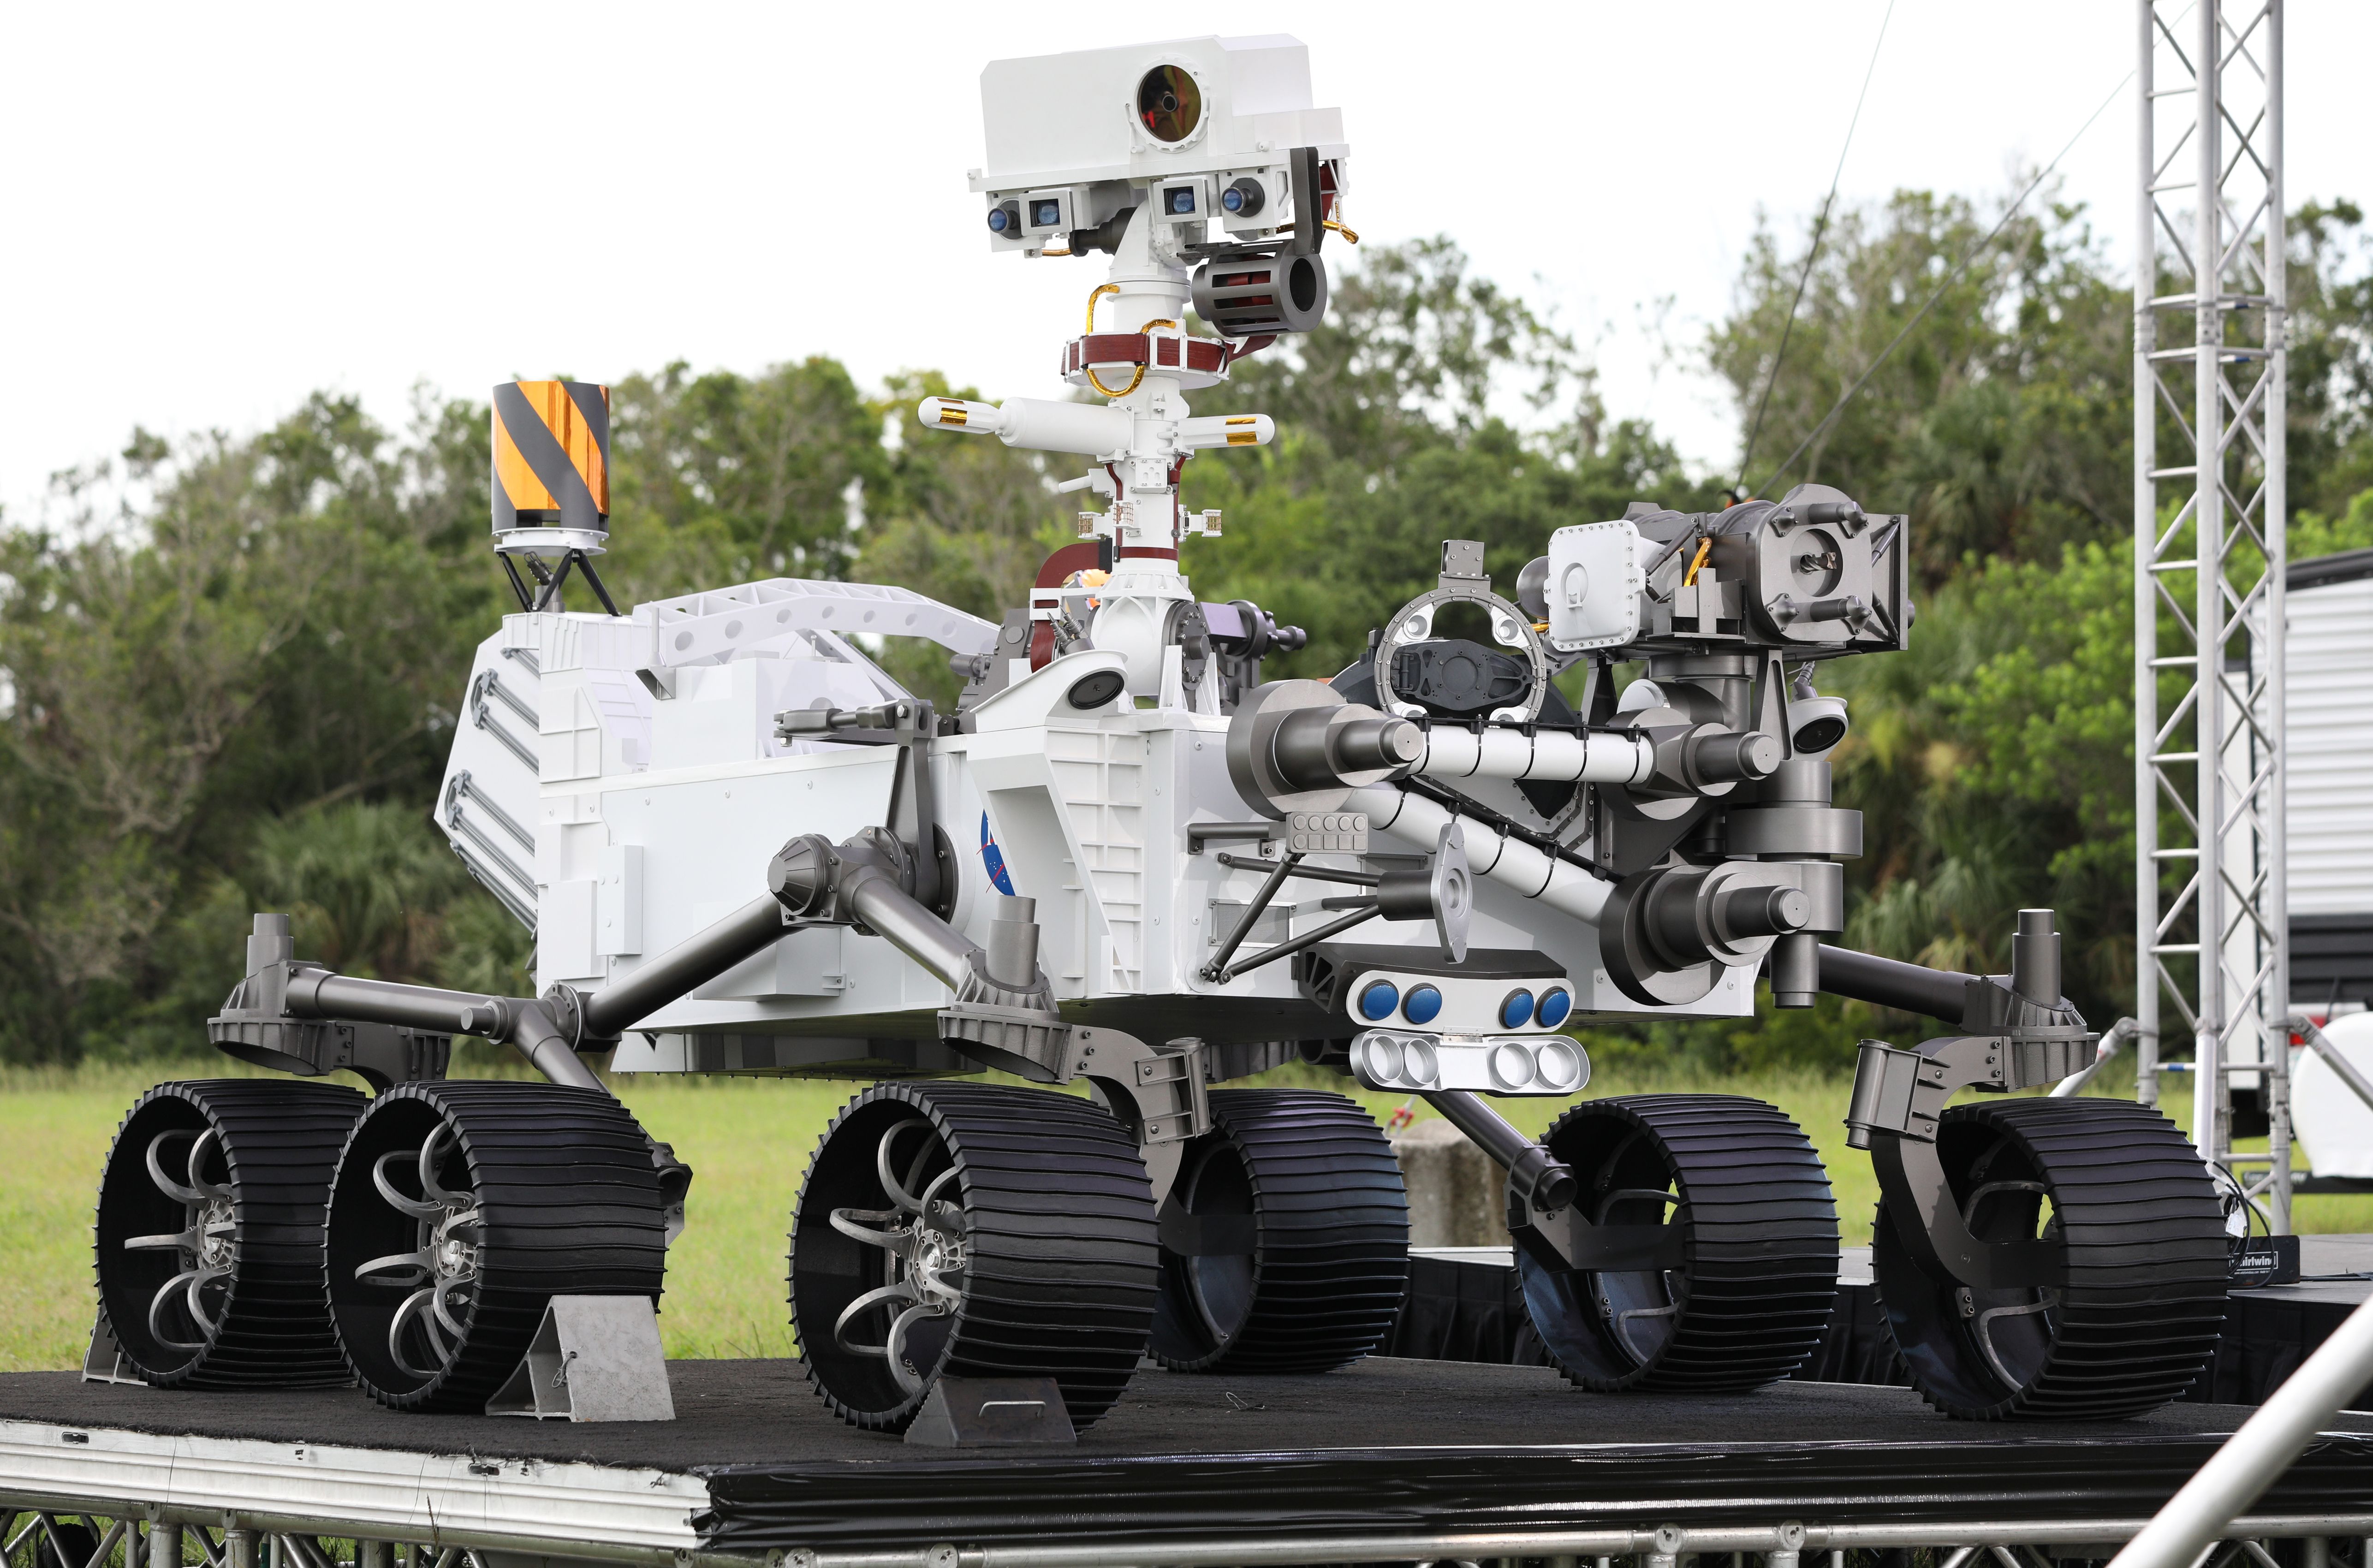 A full size model of the Perseverance rover.